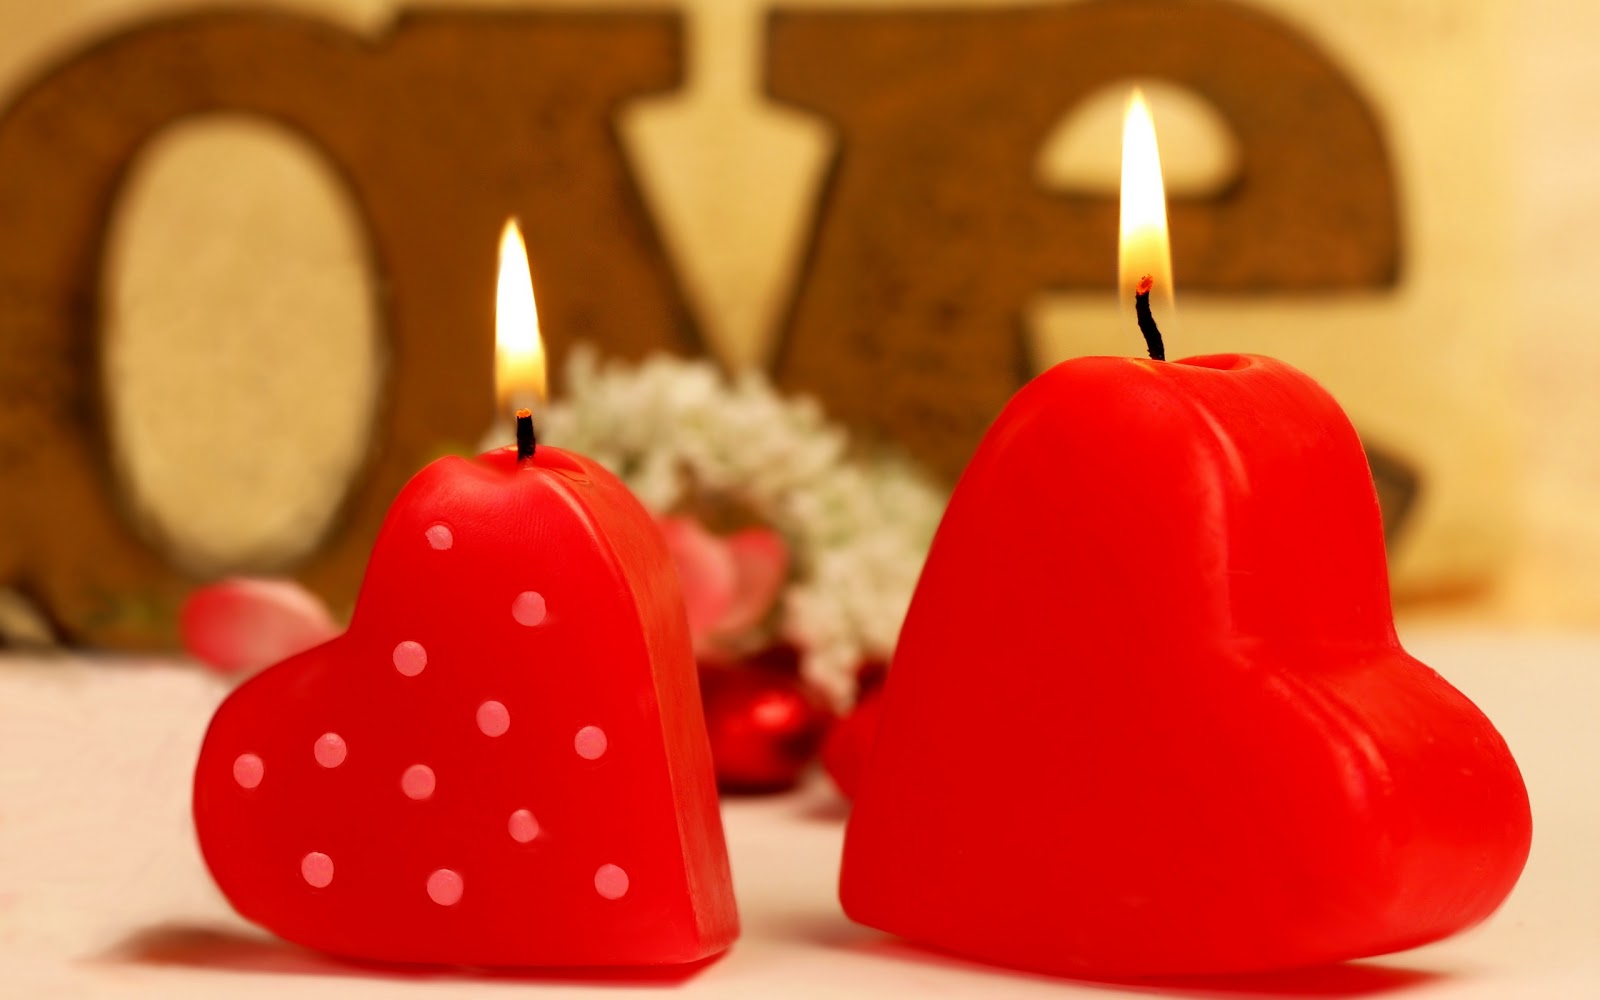 Heart n Love valentines day HD wallpapers 2014 - Full HD photo